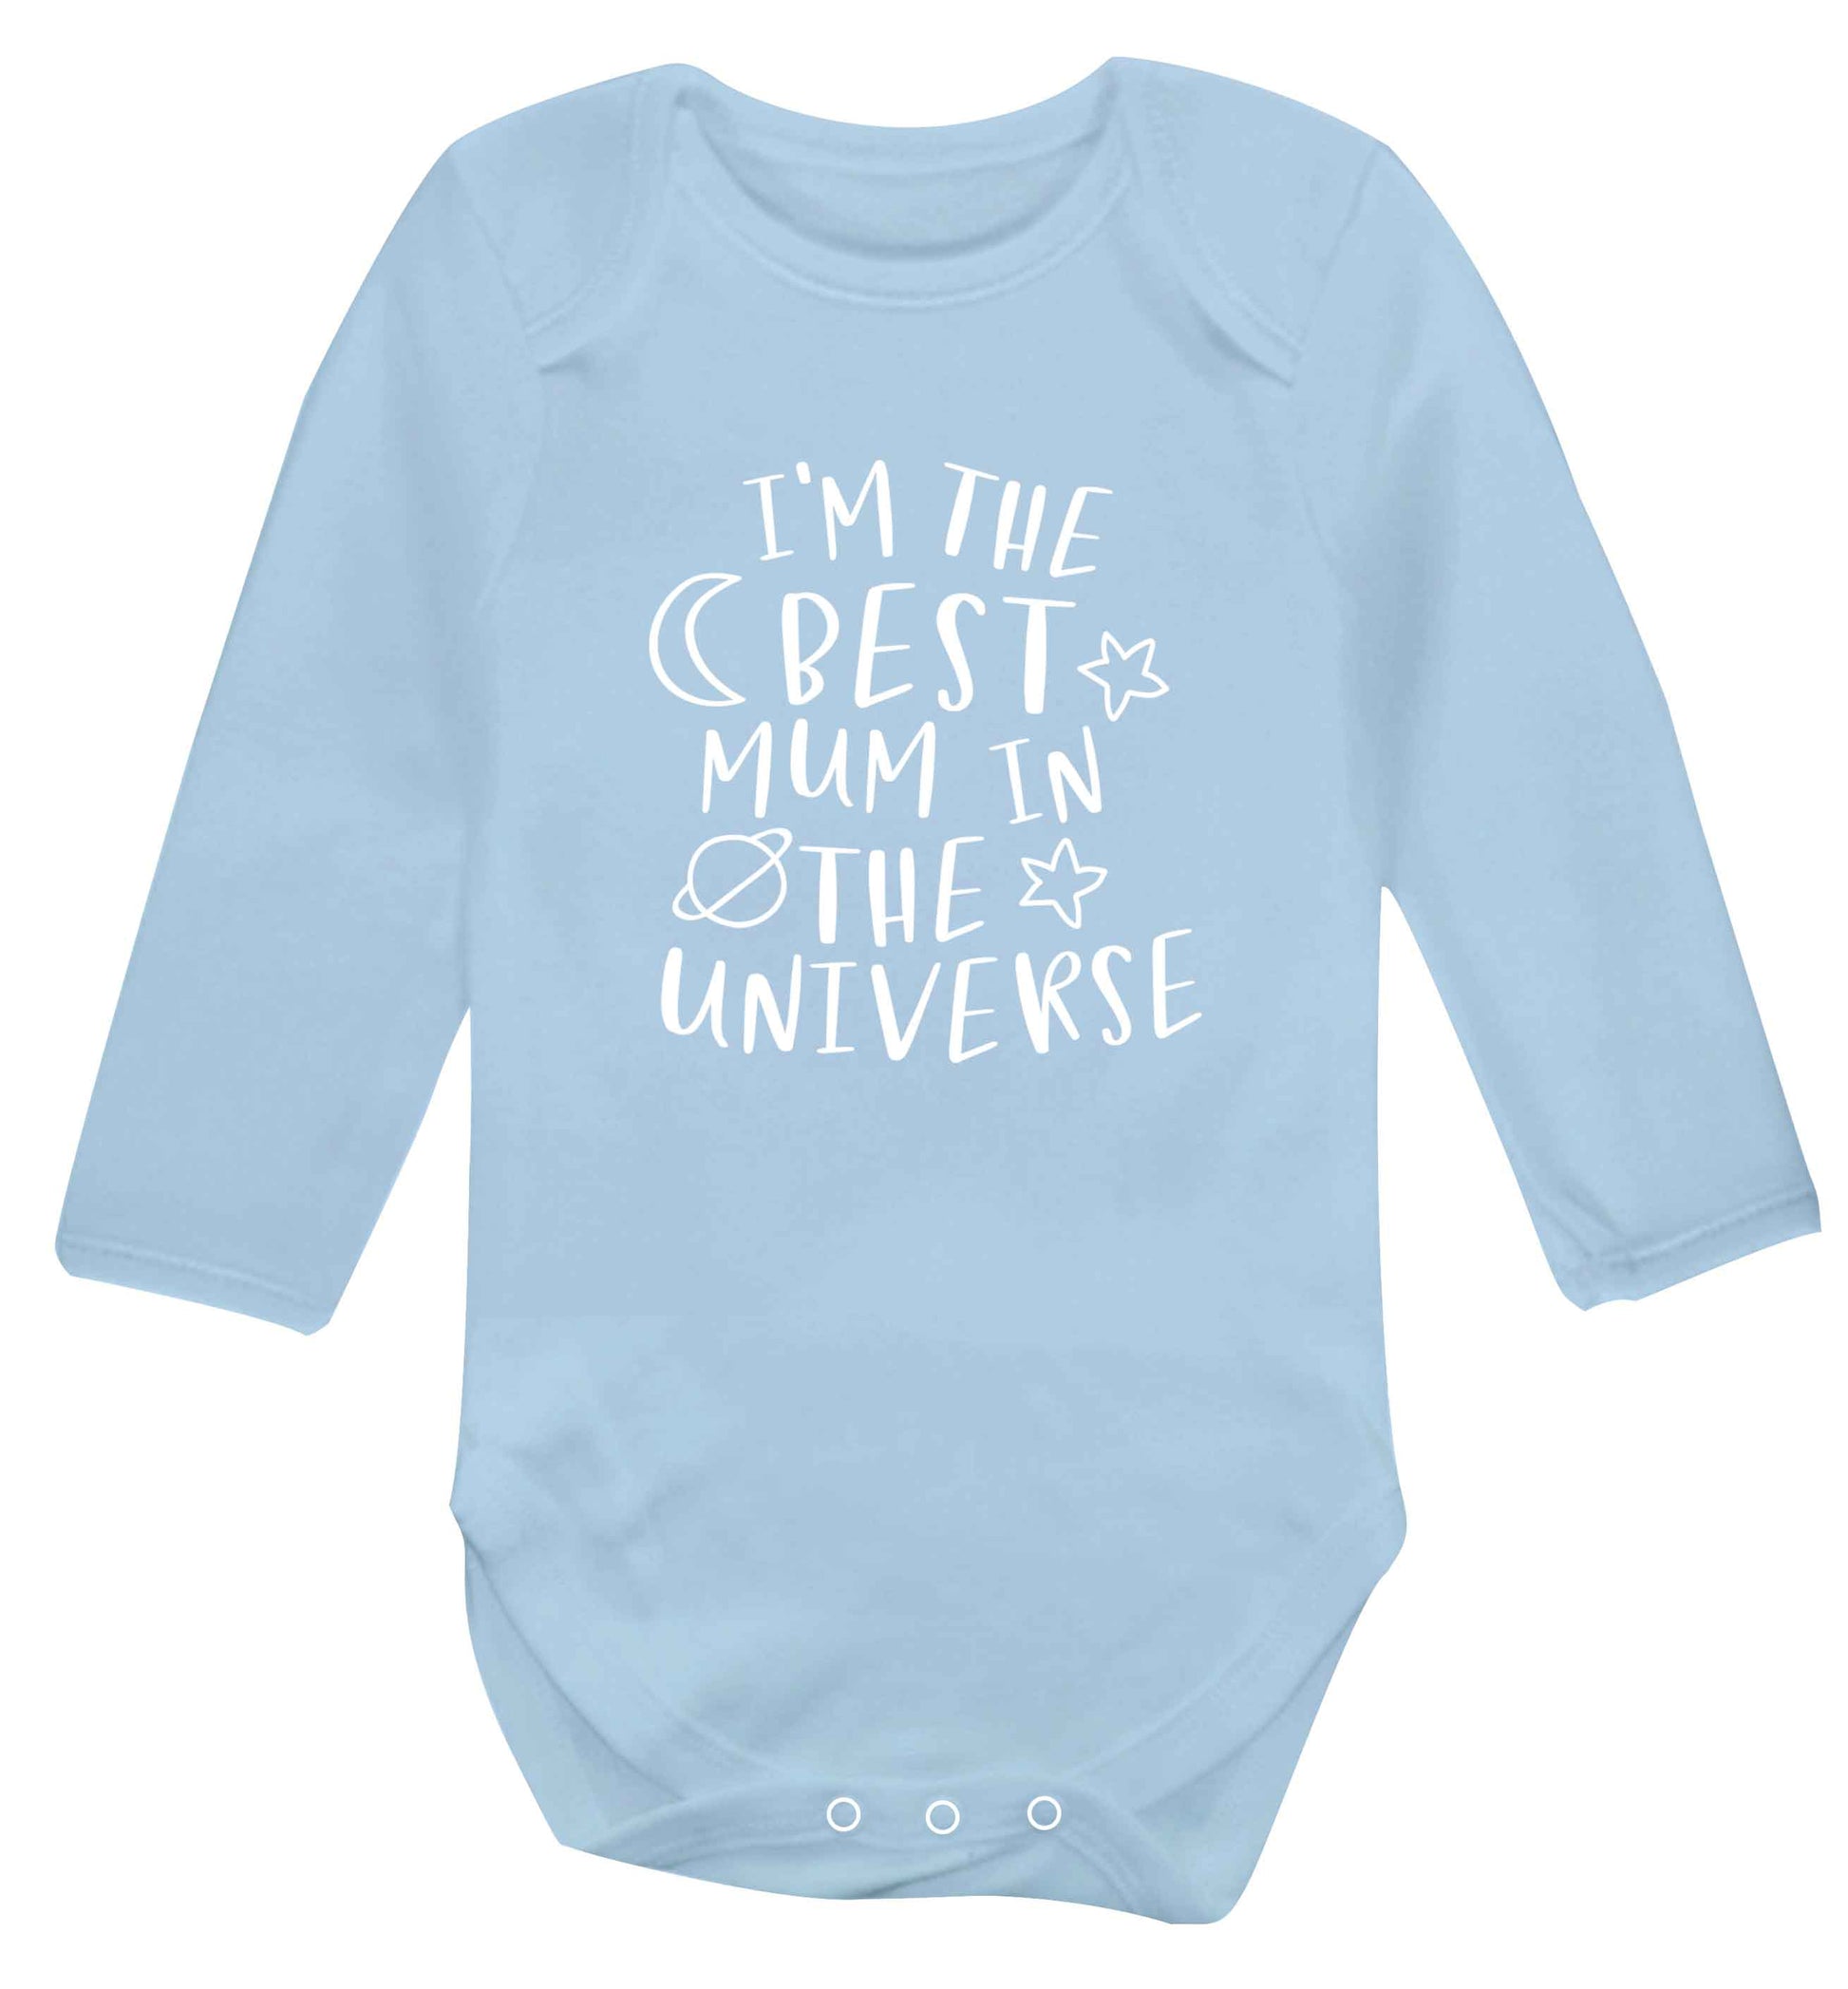 I'm the best mum in the universe baby vest long sleeved pale blue 6-12 months